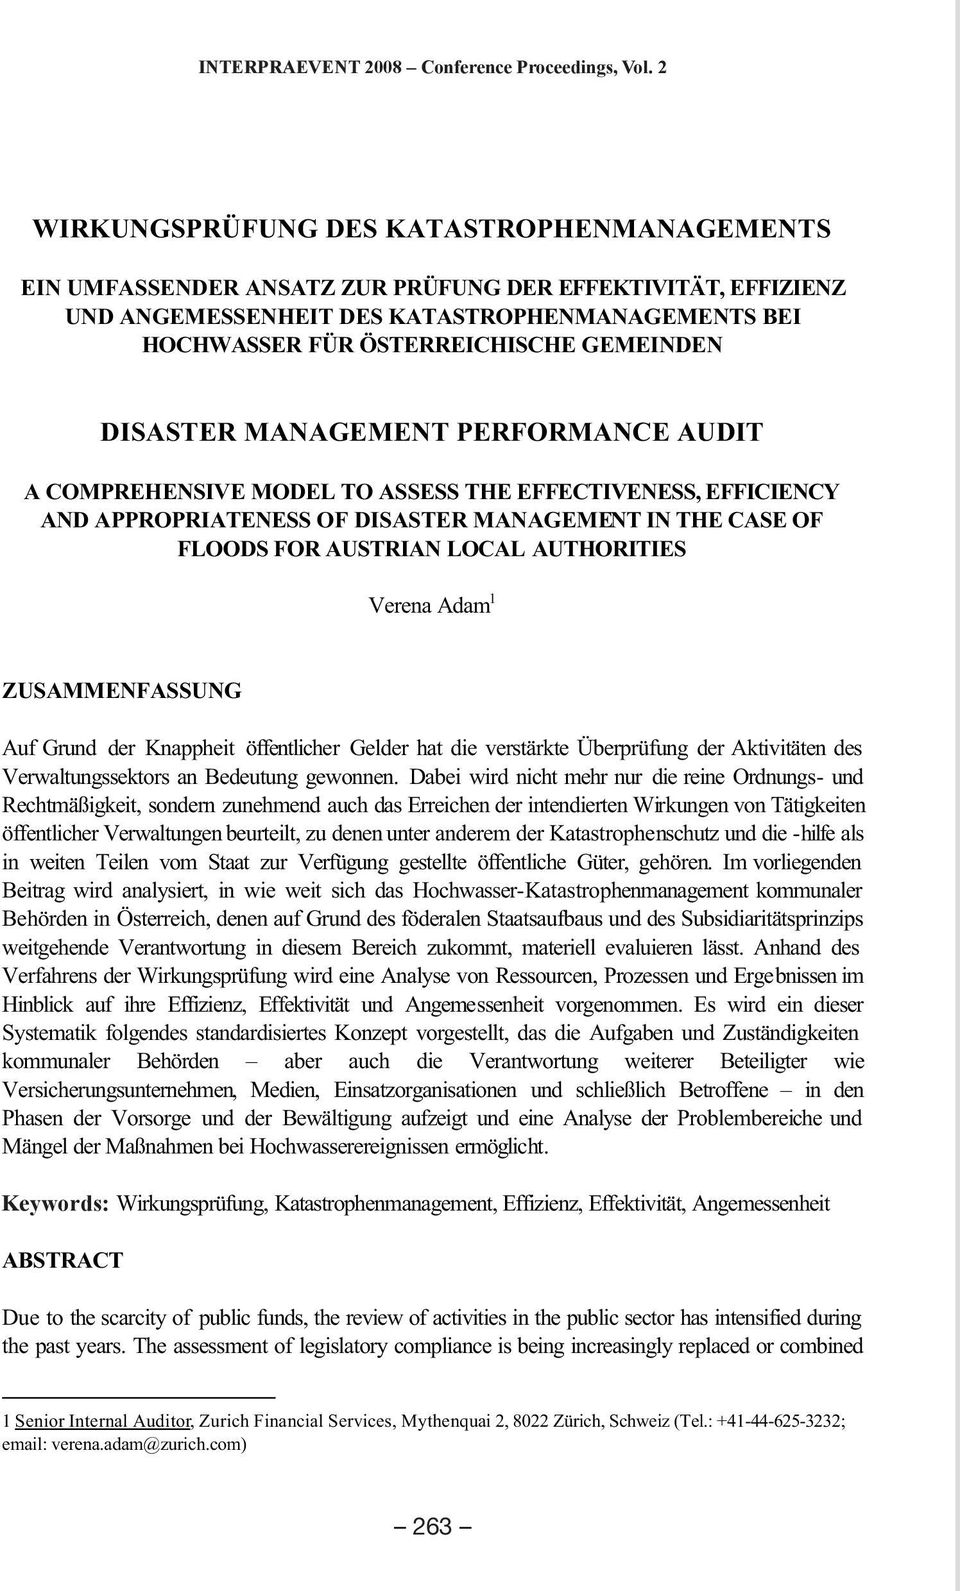 GEMEINDEN DISASTER MANAGEMENT PERFORMANCE AUDIT A COMPREHENSIVE MODEL TO ASSESS THE EFFECTIVENESS, EFFICIENCY AND APPROPRIATENESS OF DISASTER MANAGEMENT IN THE CASE OF FLOODS FOR AUSTRIAN LOCAL